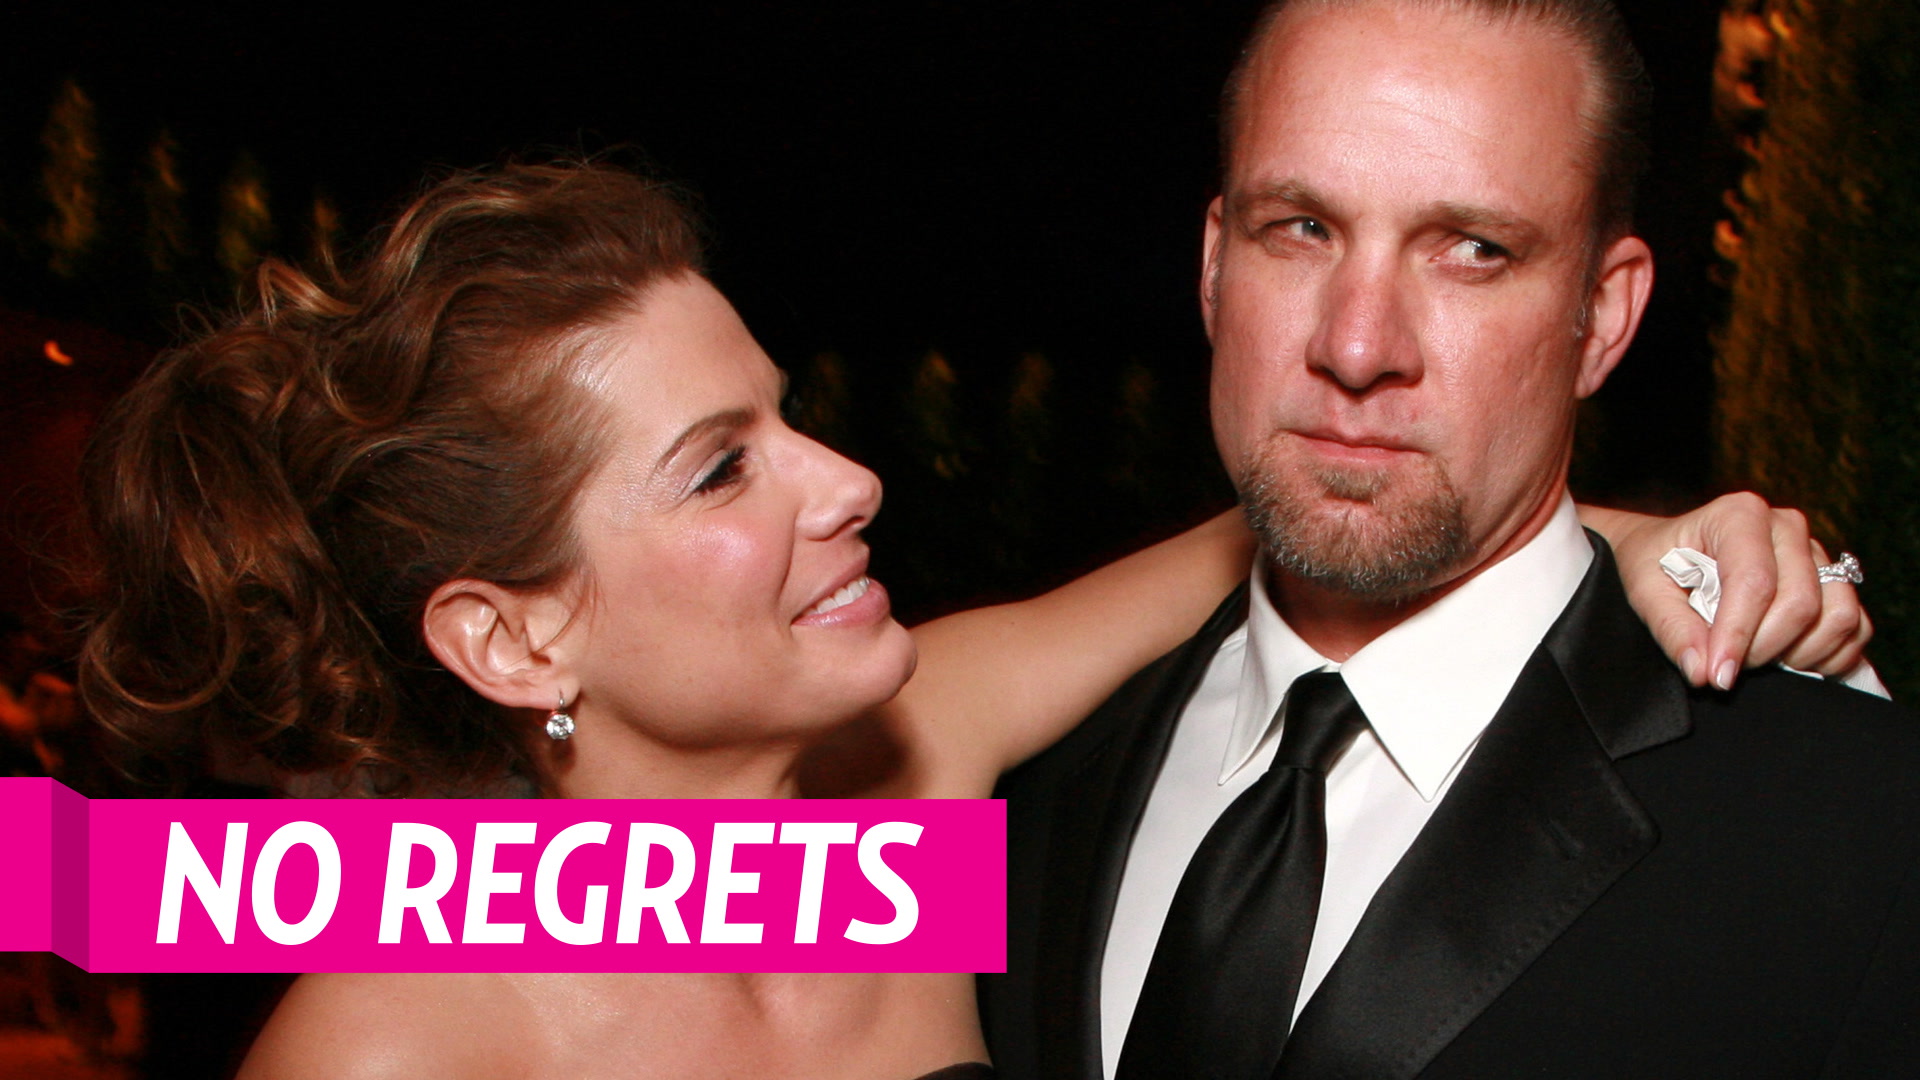 Jesse James Reflects on Sandra Bullock Divorce, His Cheating Scandal image pic